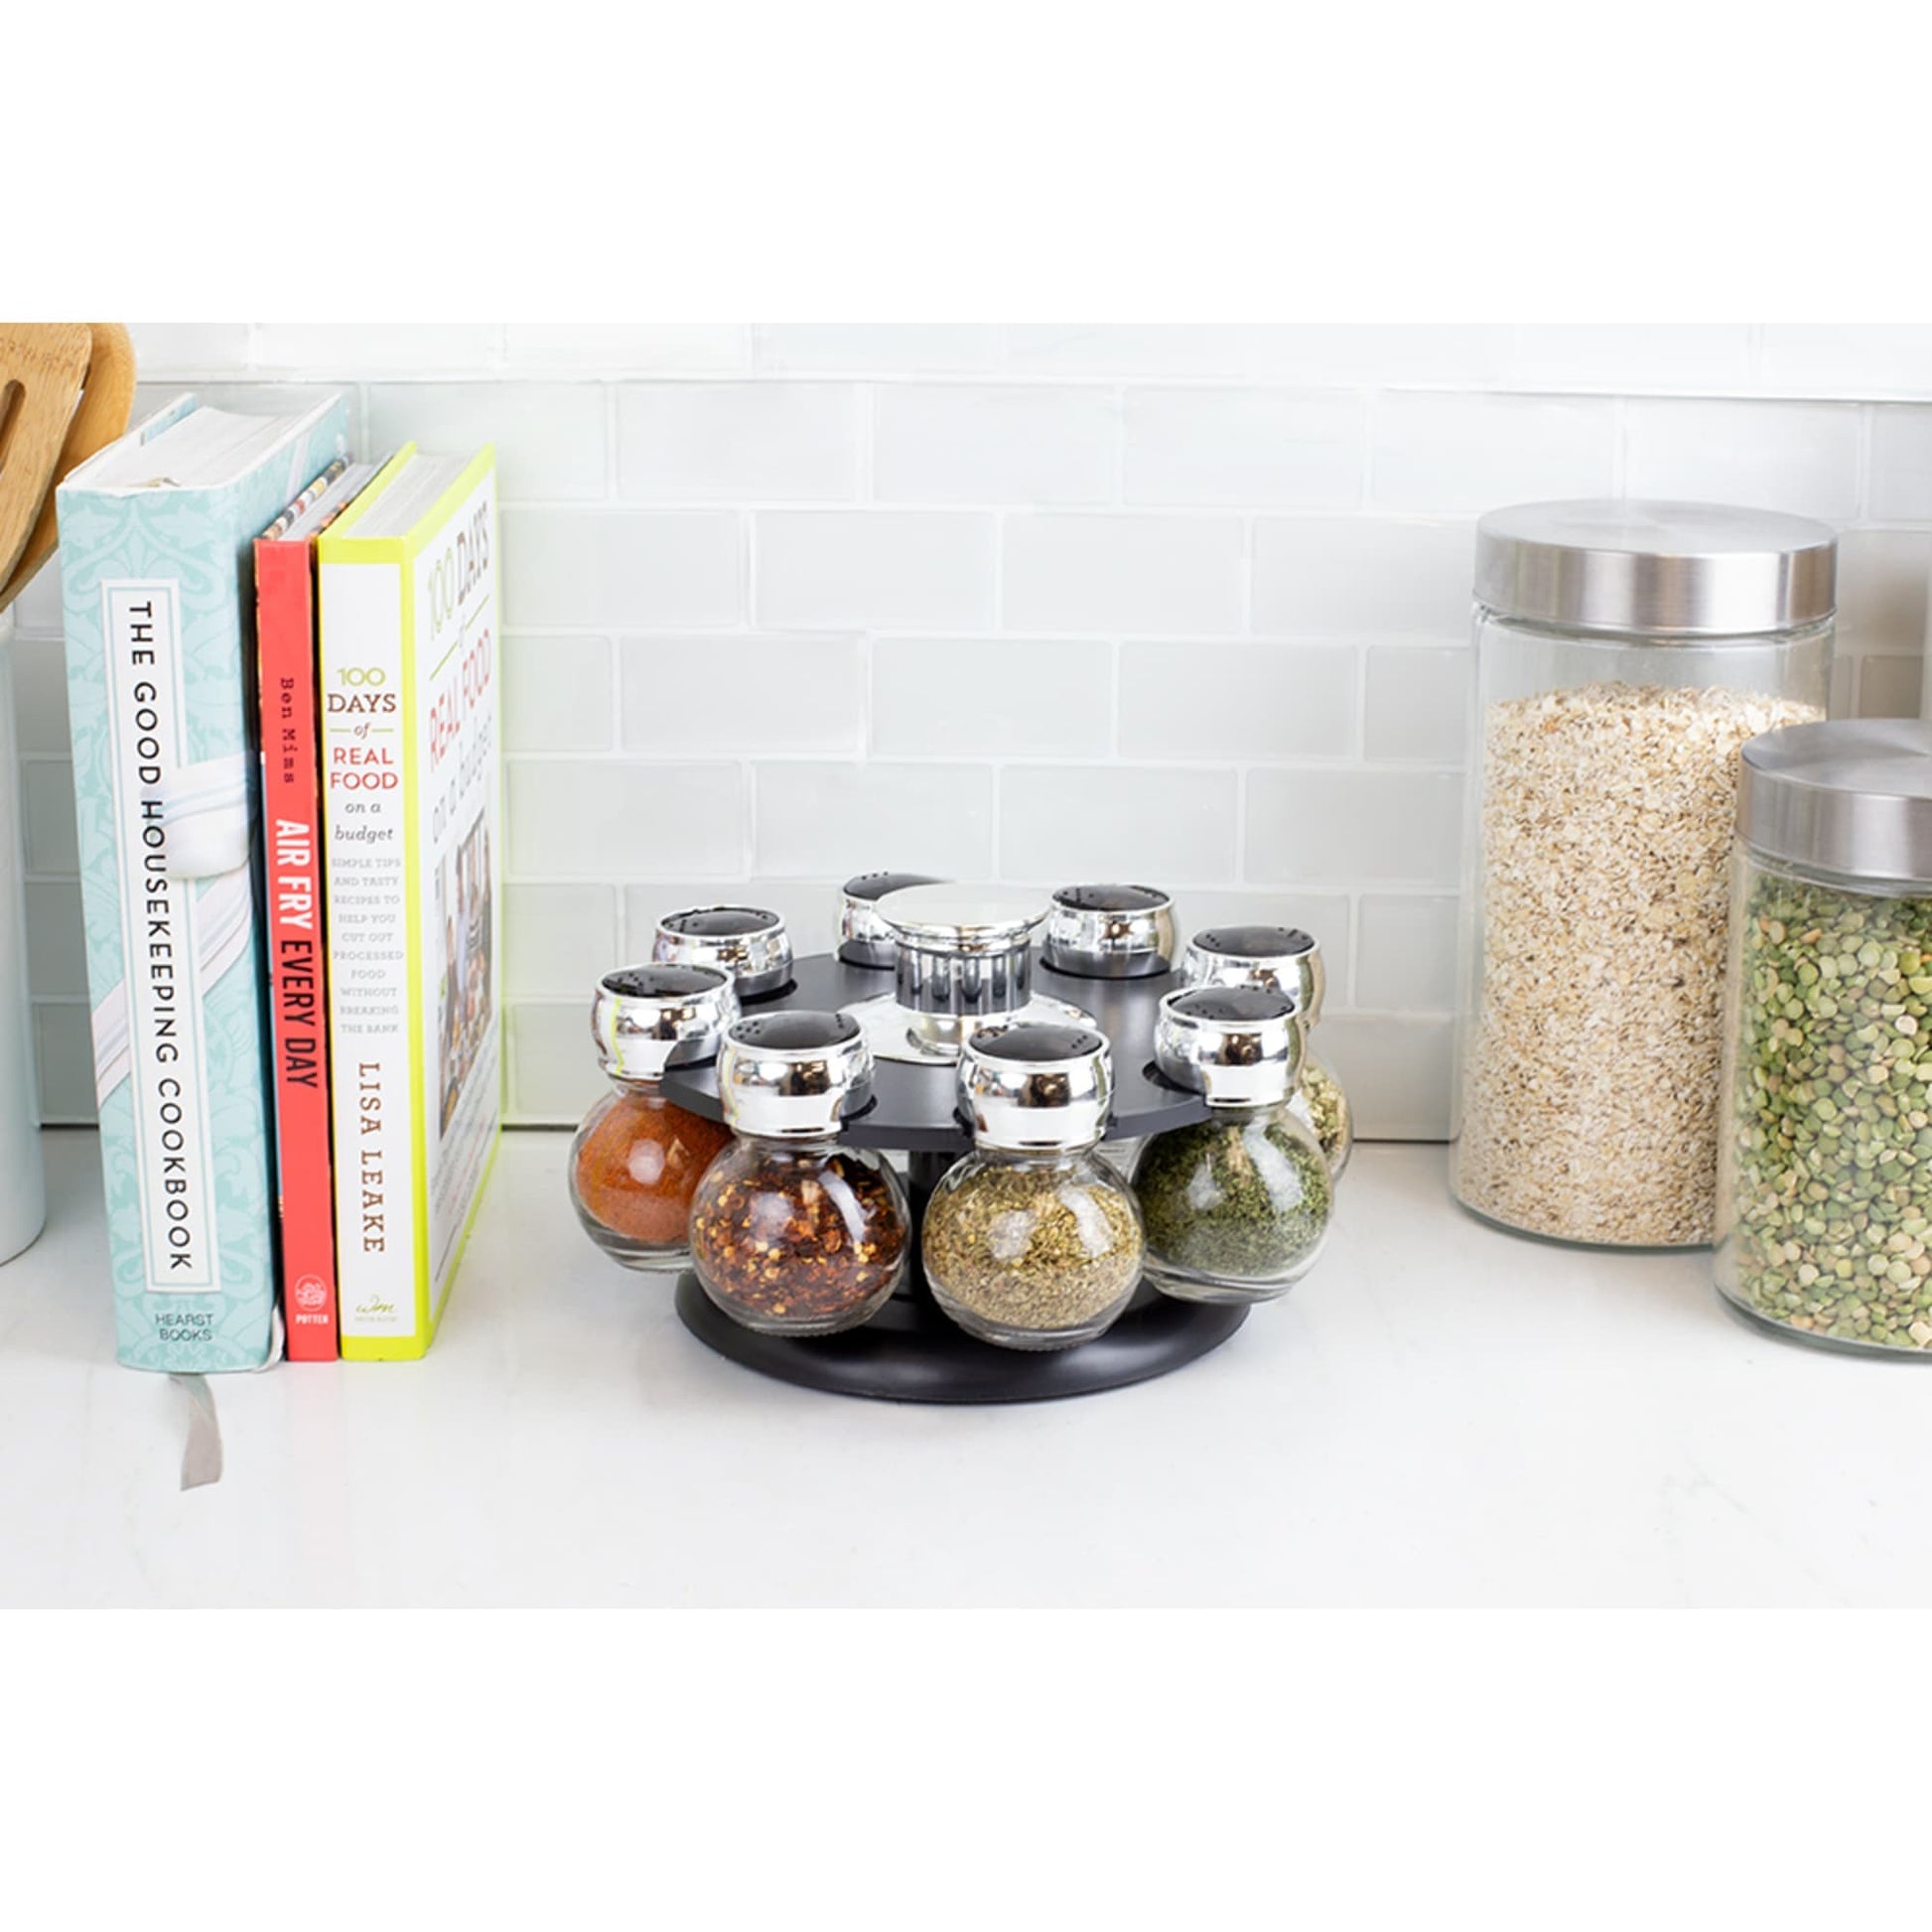 4 Jar Spice Rack Filled with Spices